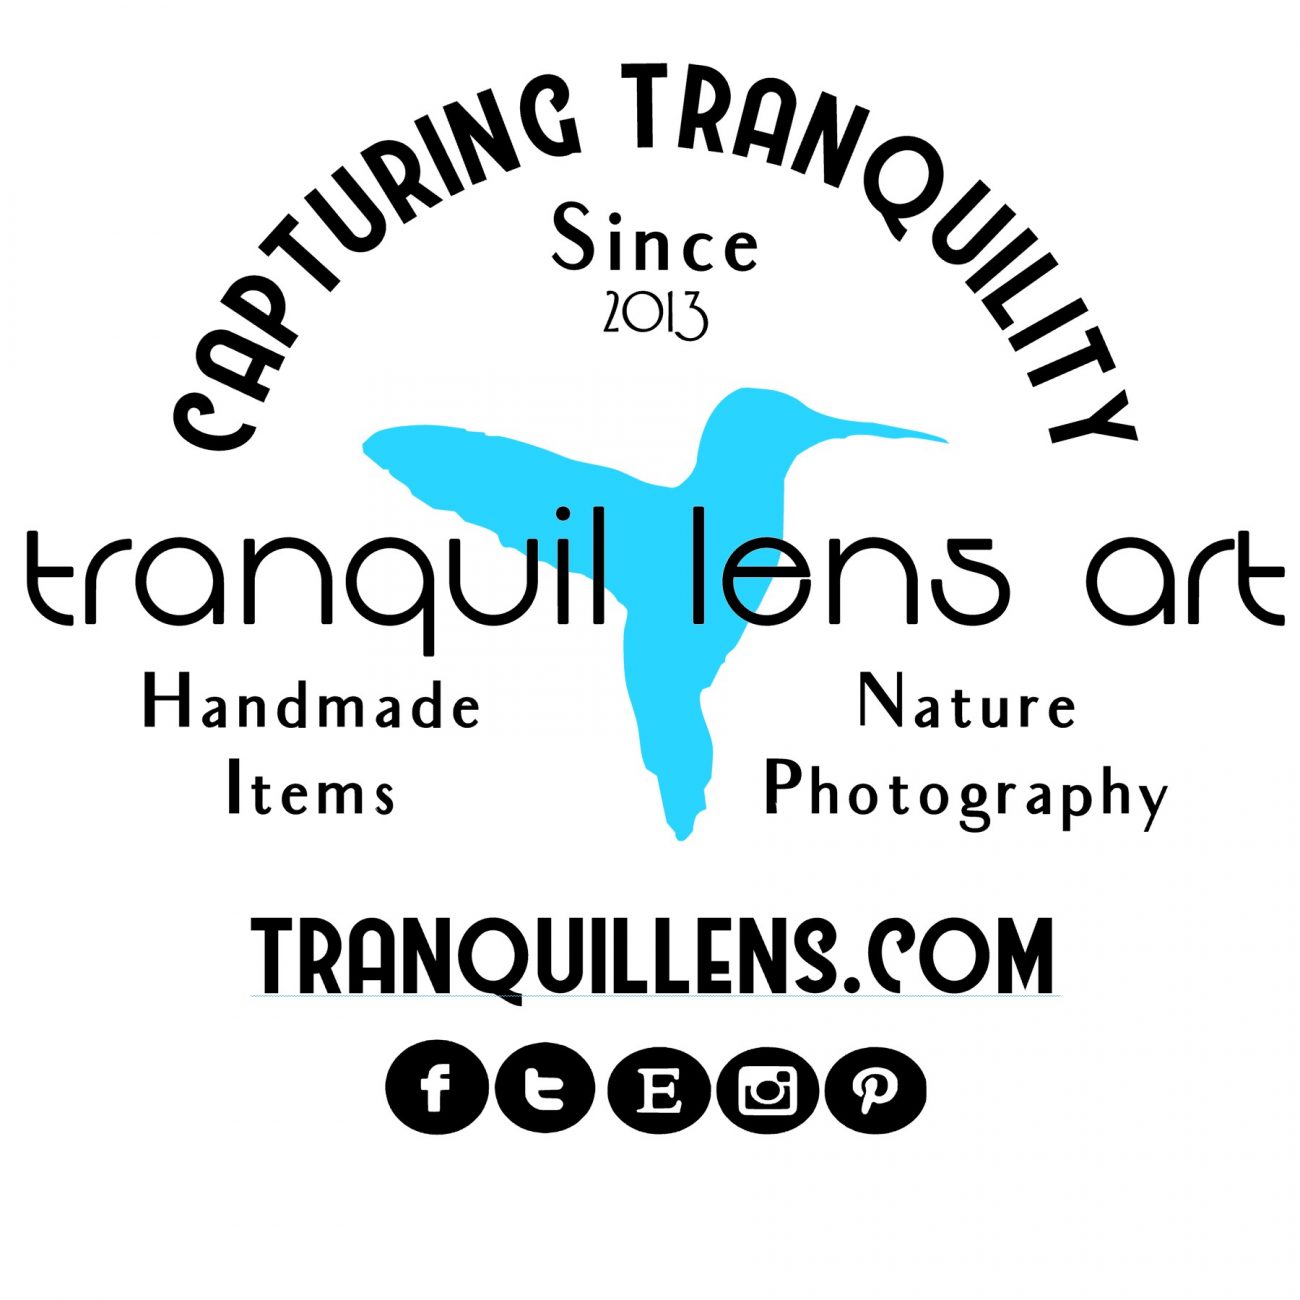 The Tranquil Lens